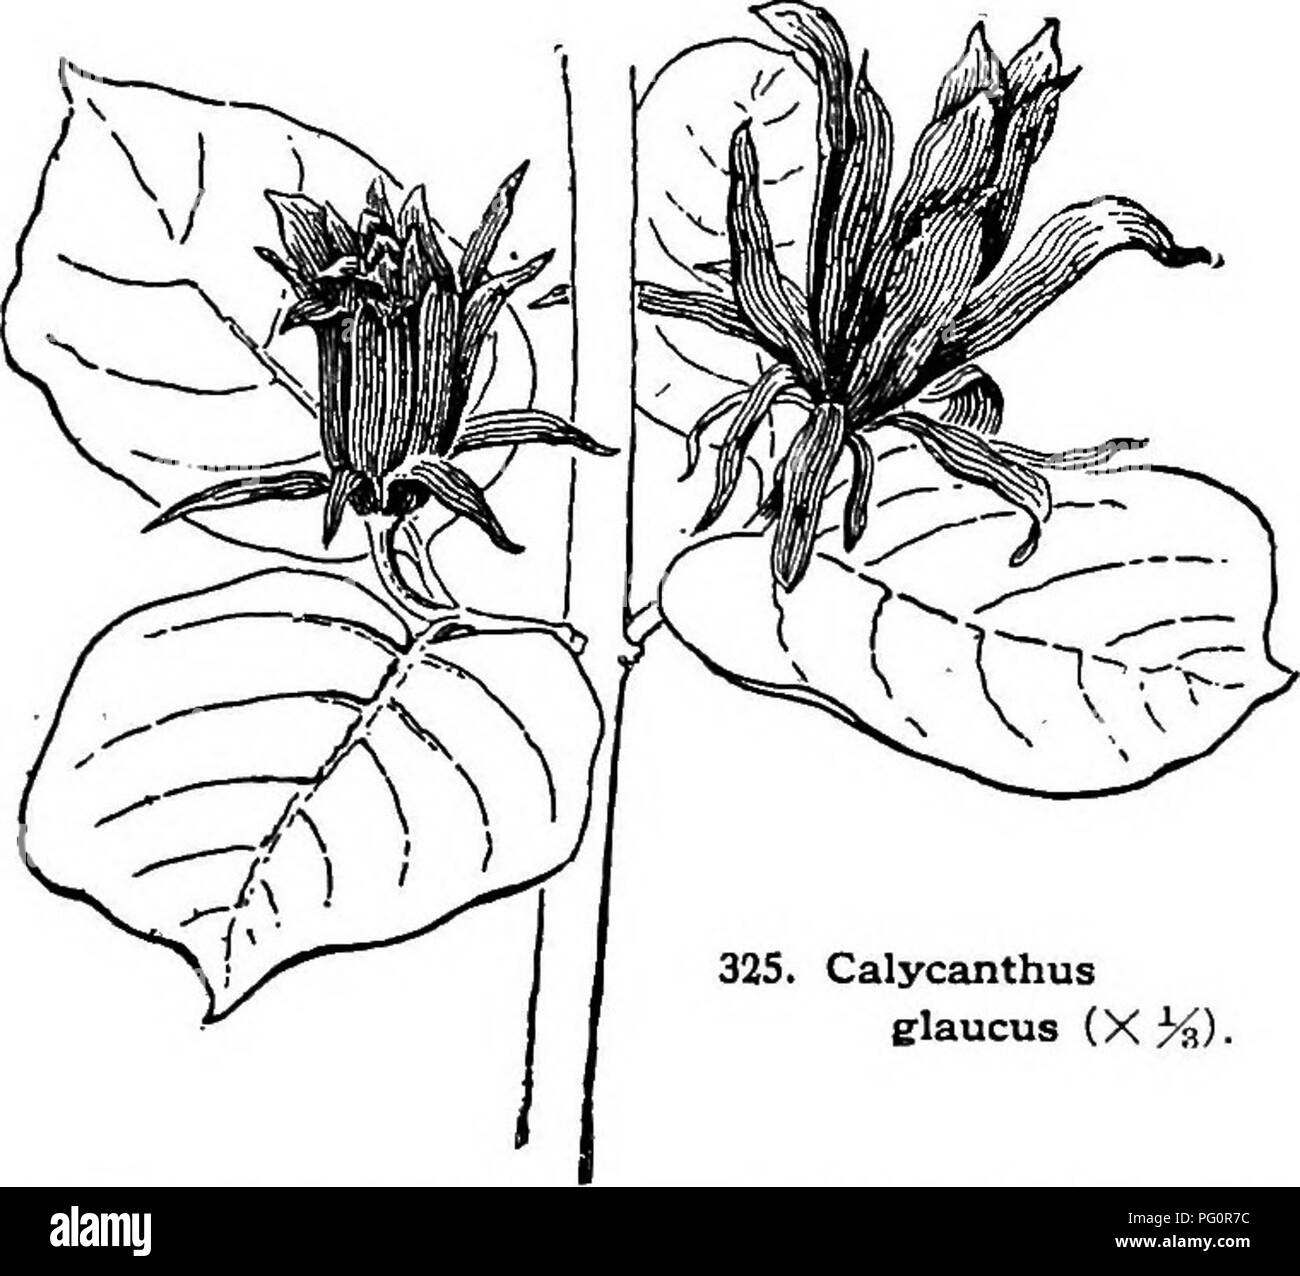 . Cyclopedia of American horticulture, comprising suggestions for cultivation of horticultural plants, descriptions of the species of fruits, vegetables, flowers, and ornamental plants sold in the United States and Canada, together with geographical and biographical sketches. Gardening. CALTHA CALYPTROGYNE 223 8tT6sa-pUno, Hort. (var. flore-pleno, Hort.). An im- provement on the above ; fls. larger, of greater sub- stance, and often much doubled. Very beautiful. K. C. Davis and J. B. Keller. CALTBOPS. Trapa. CALYCANTHUS (Kalyx and anthos, flower; the calyx is large and conspicuous). CalycantMc Stock Photo